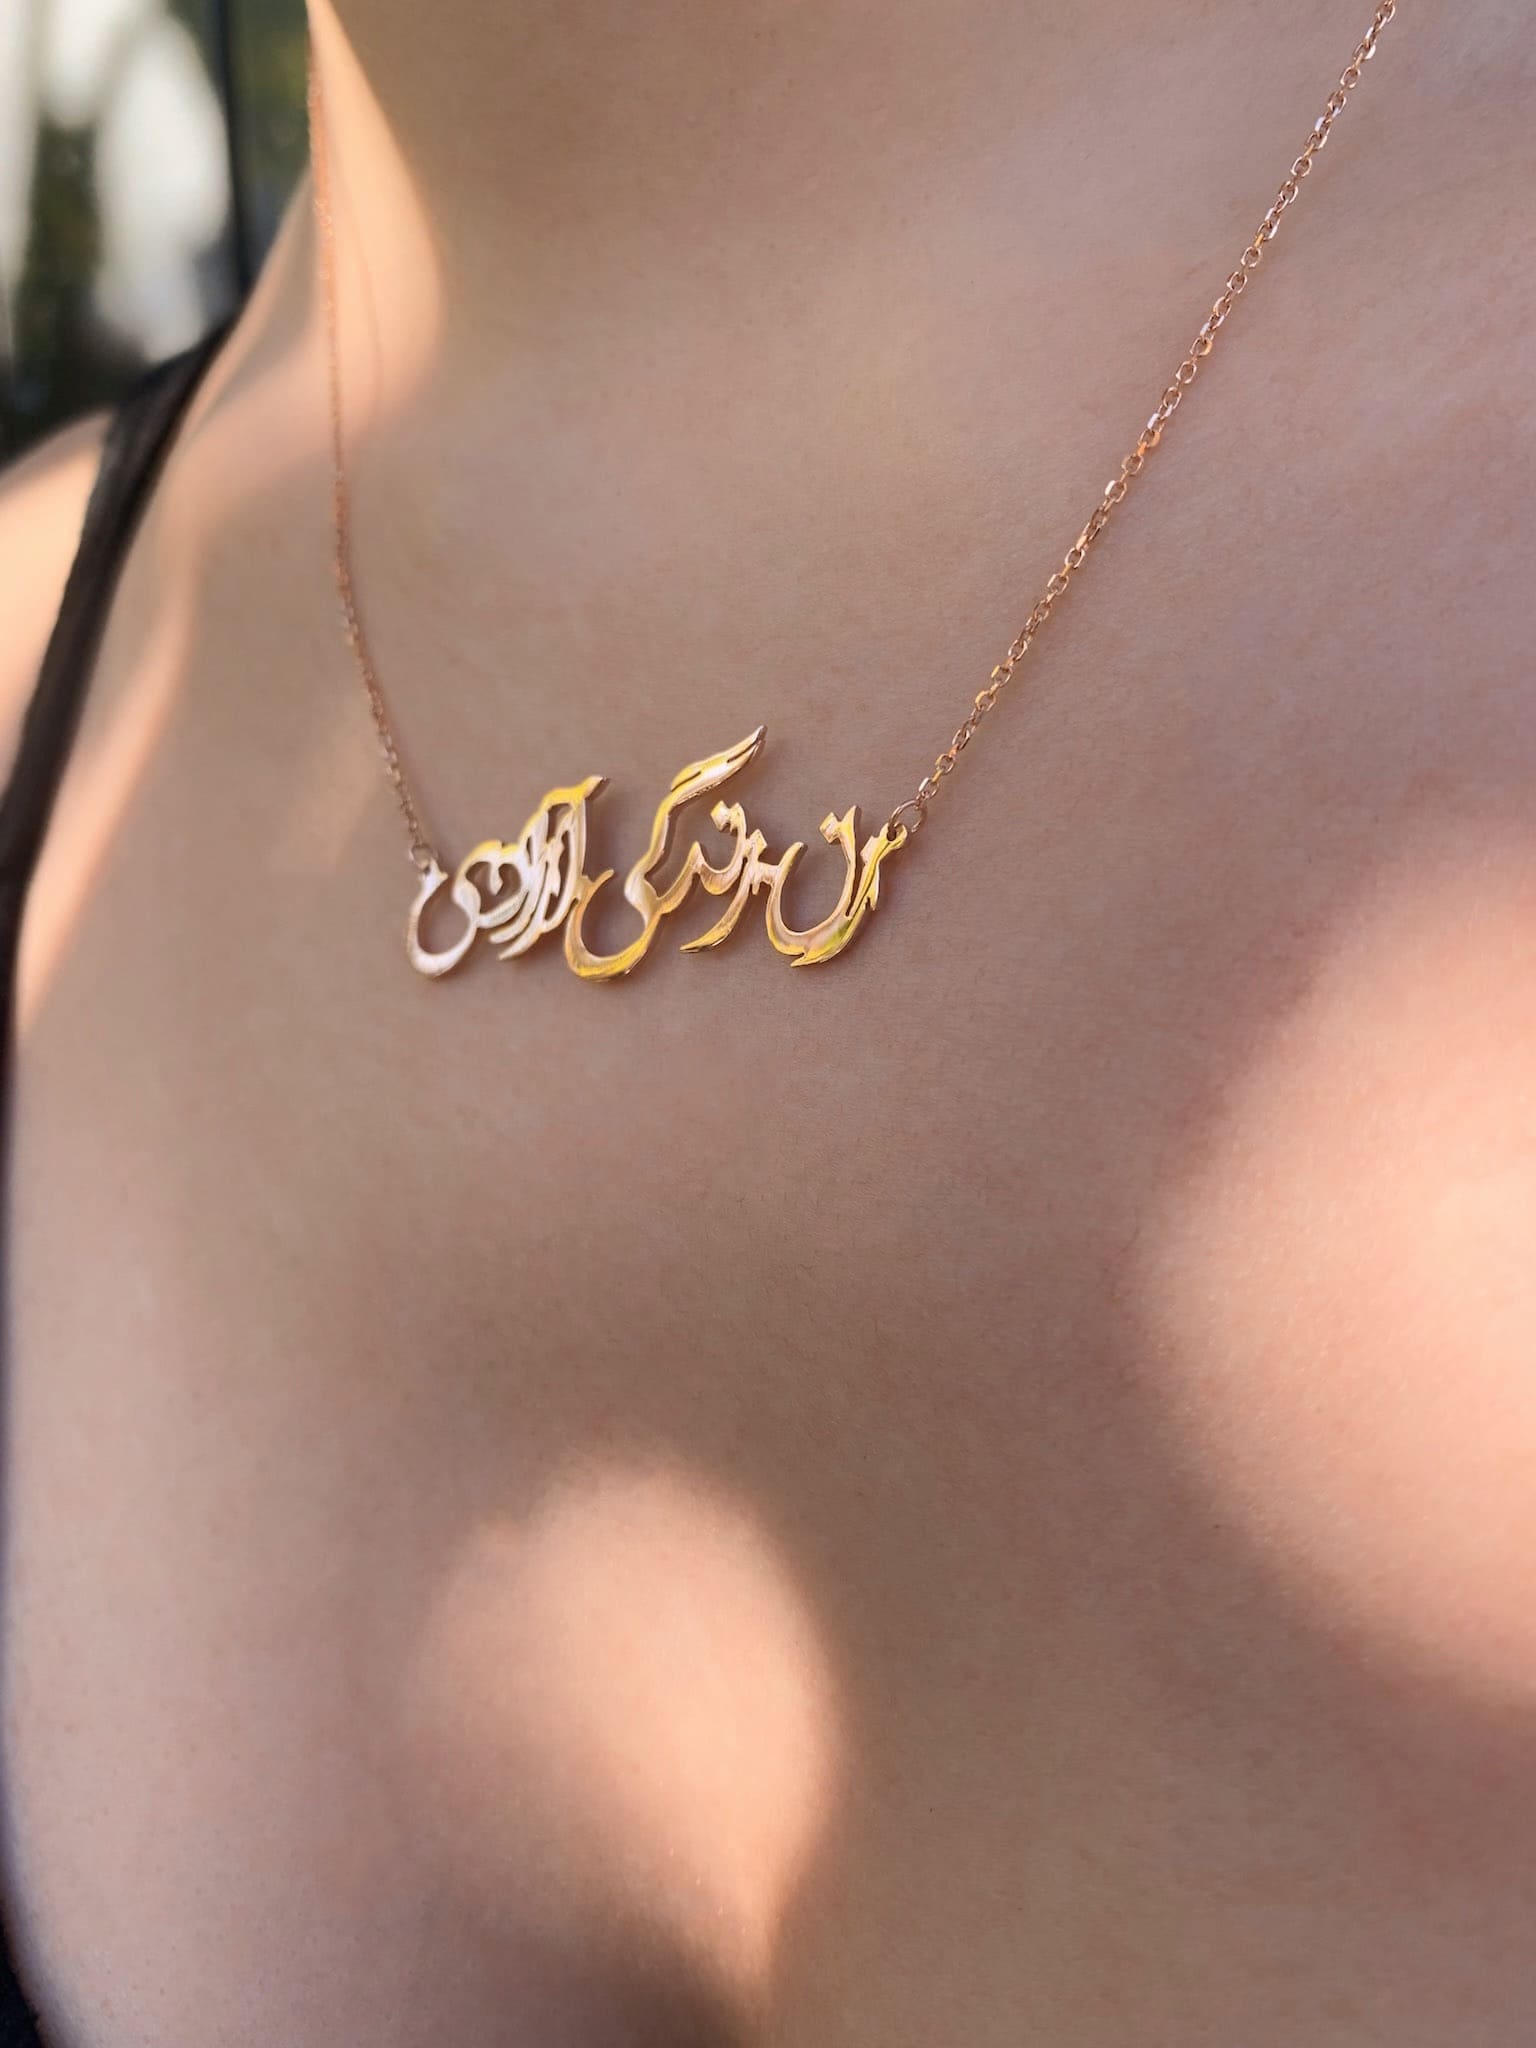 Women Life Freedom Iran Calligraphy Name Necklace